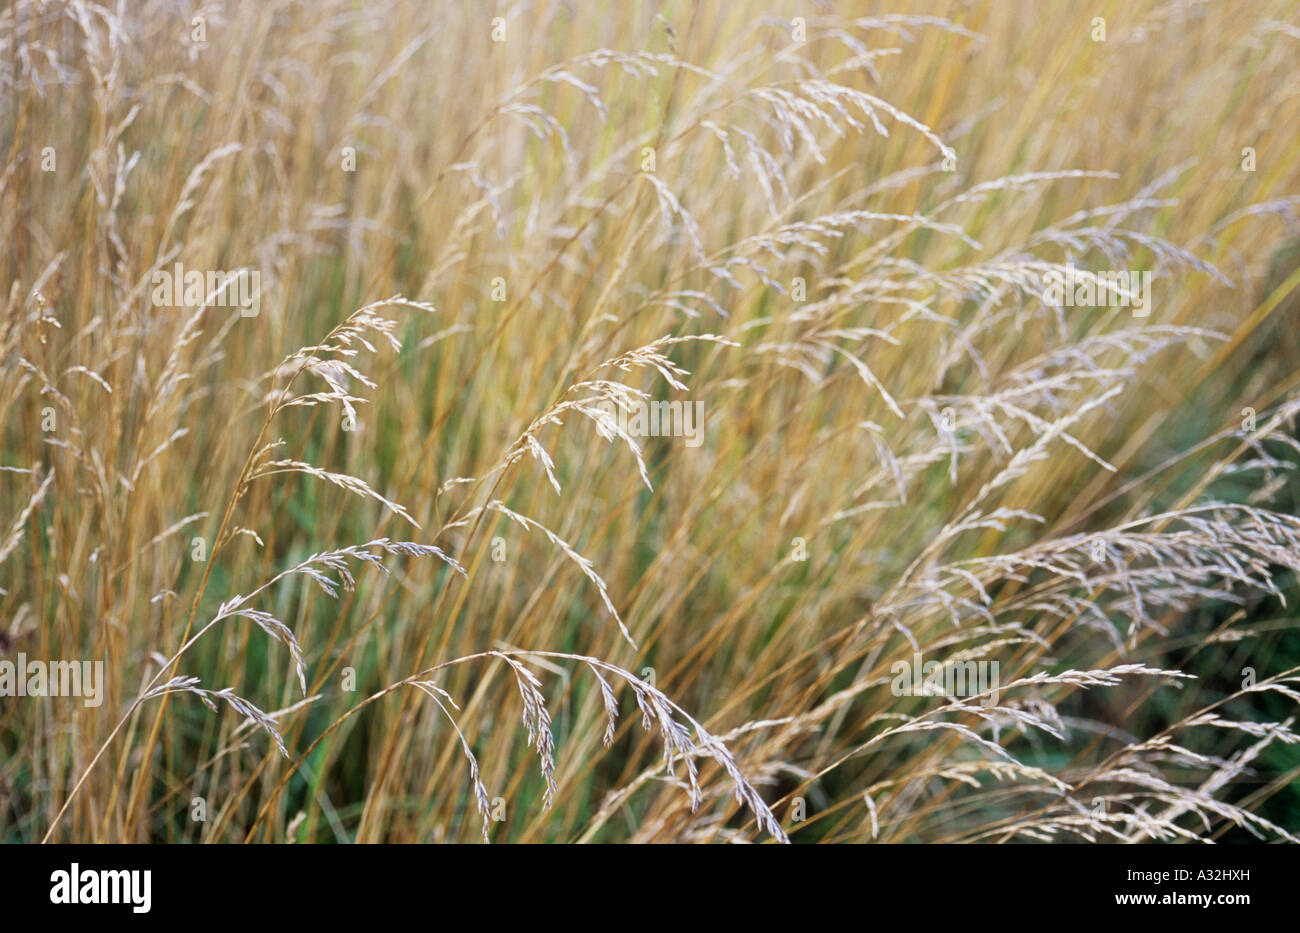 Close up of mature golden grass stems and seedheads of Red or Creeping fescue or Festuca rubra Stock Photo